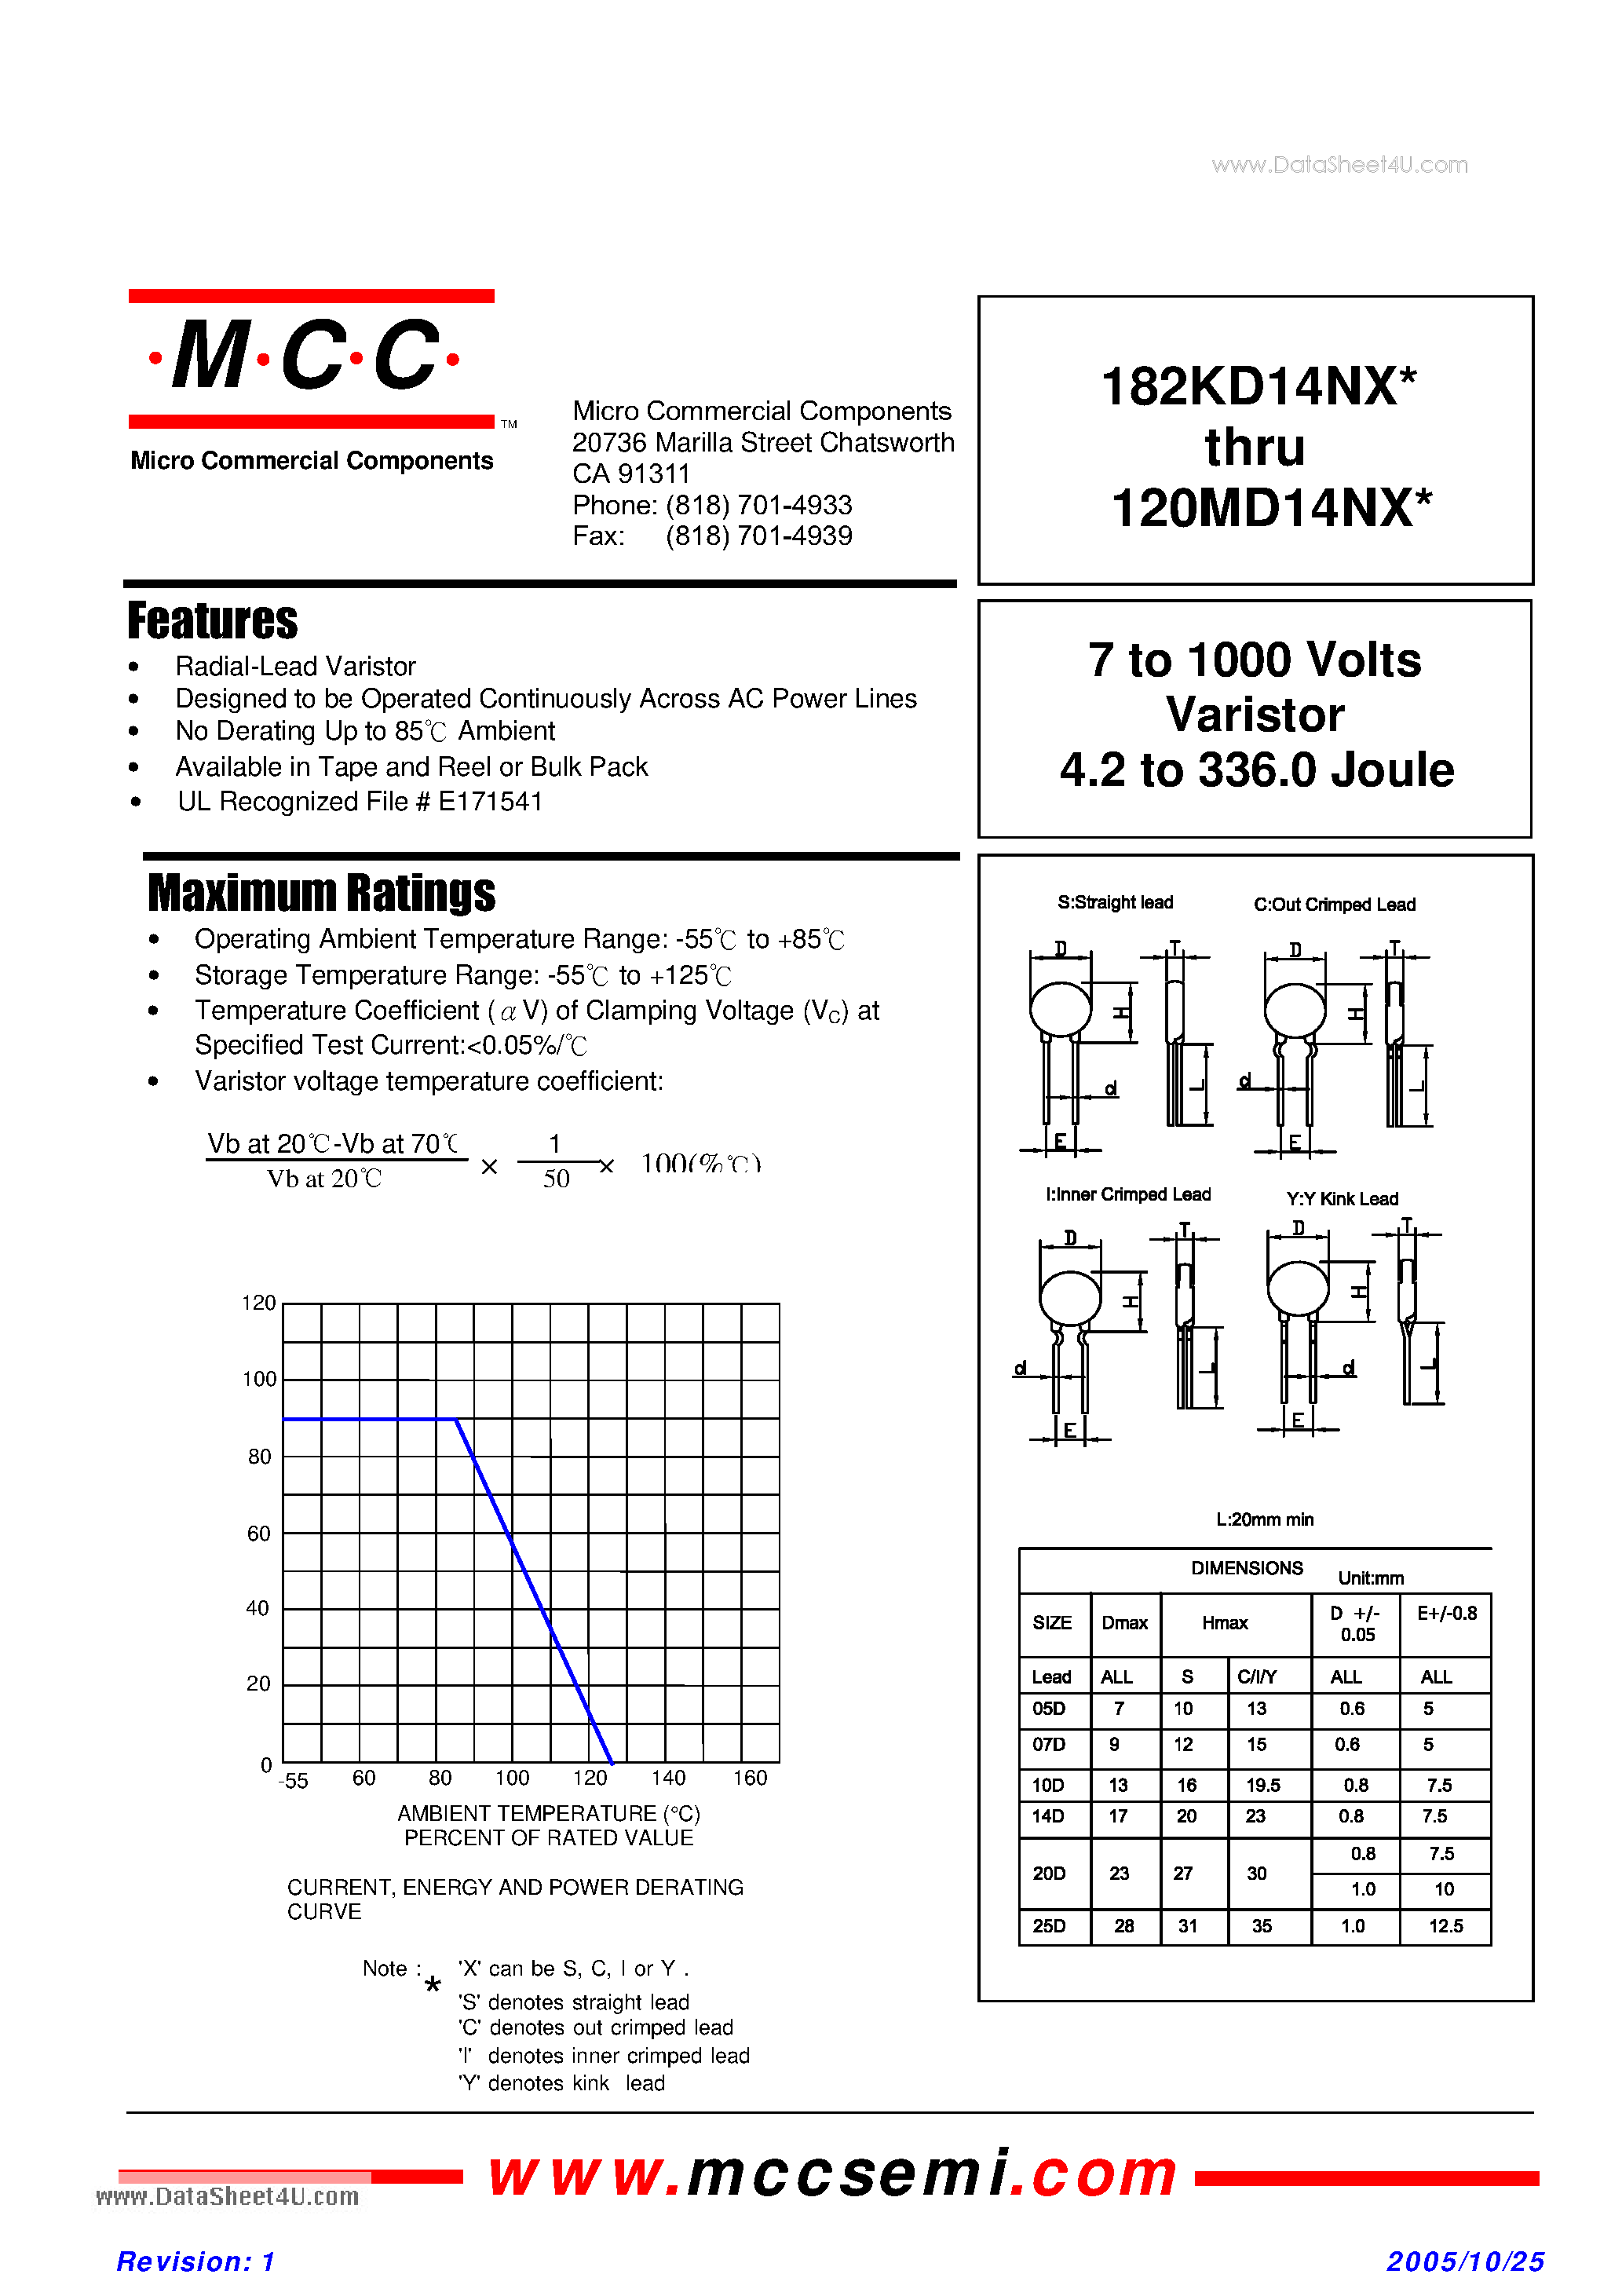 Datasheet 101KD14NX - 7 to 1000 Volts Varistor 4.2 to 336.0 Joule page 1